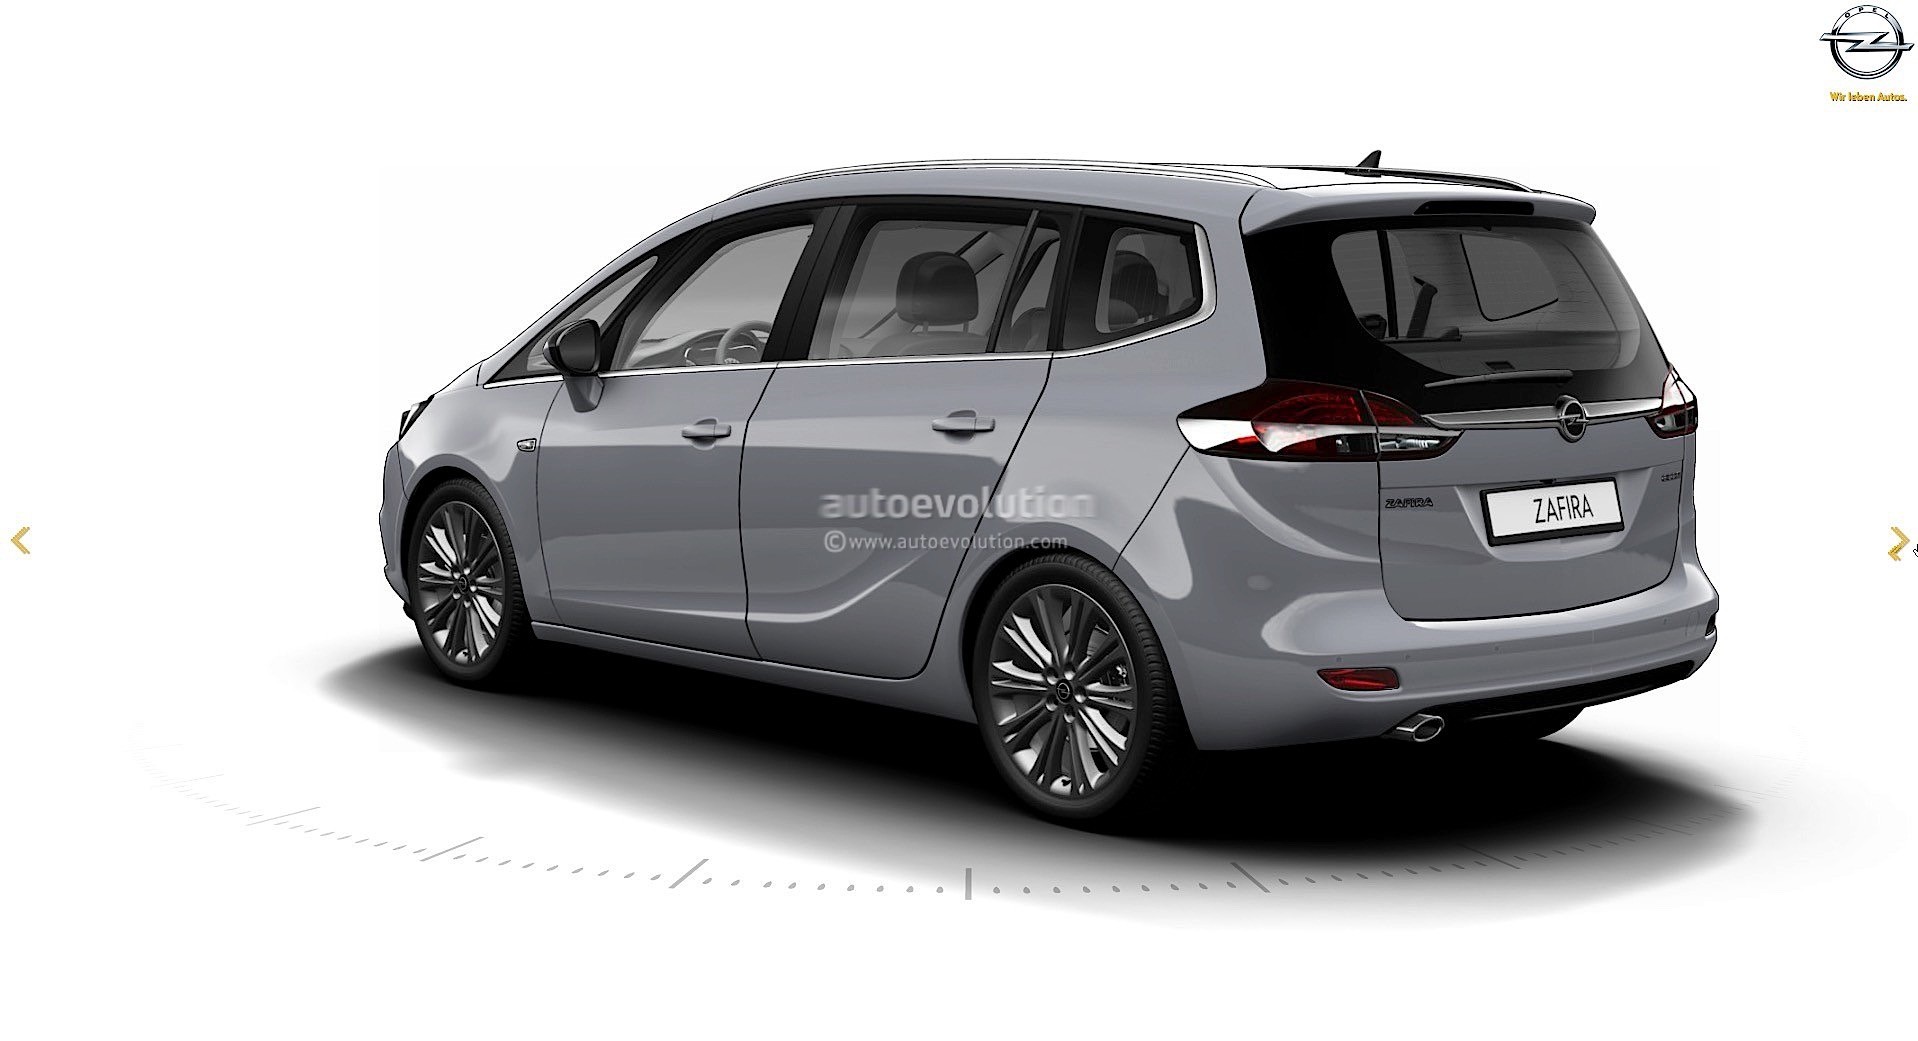 2017-opel-zafira-facelift-leaked-on-gm-website-here-are-the-first-pics_12-autonovosti.me-9